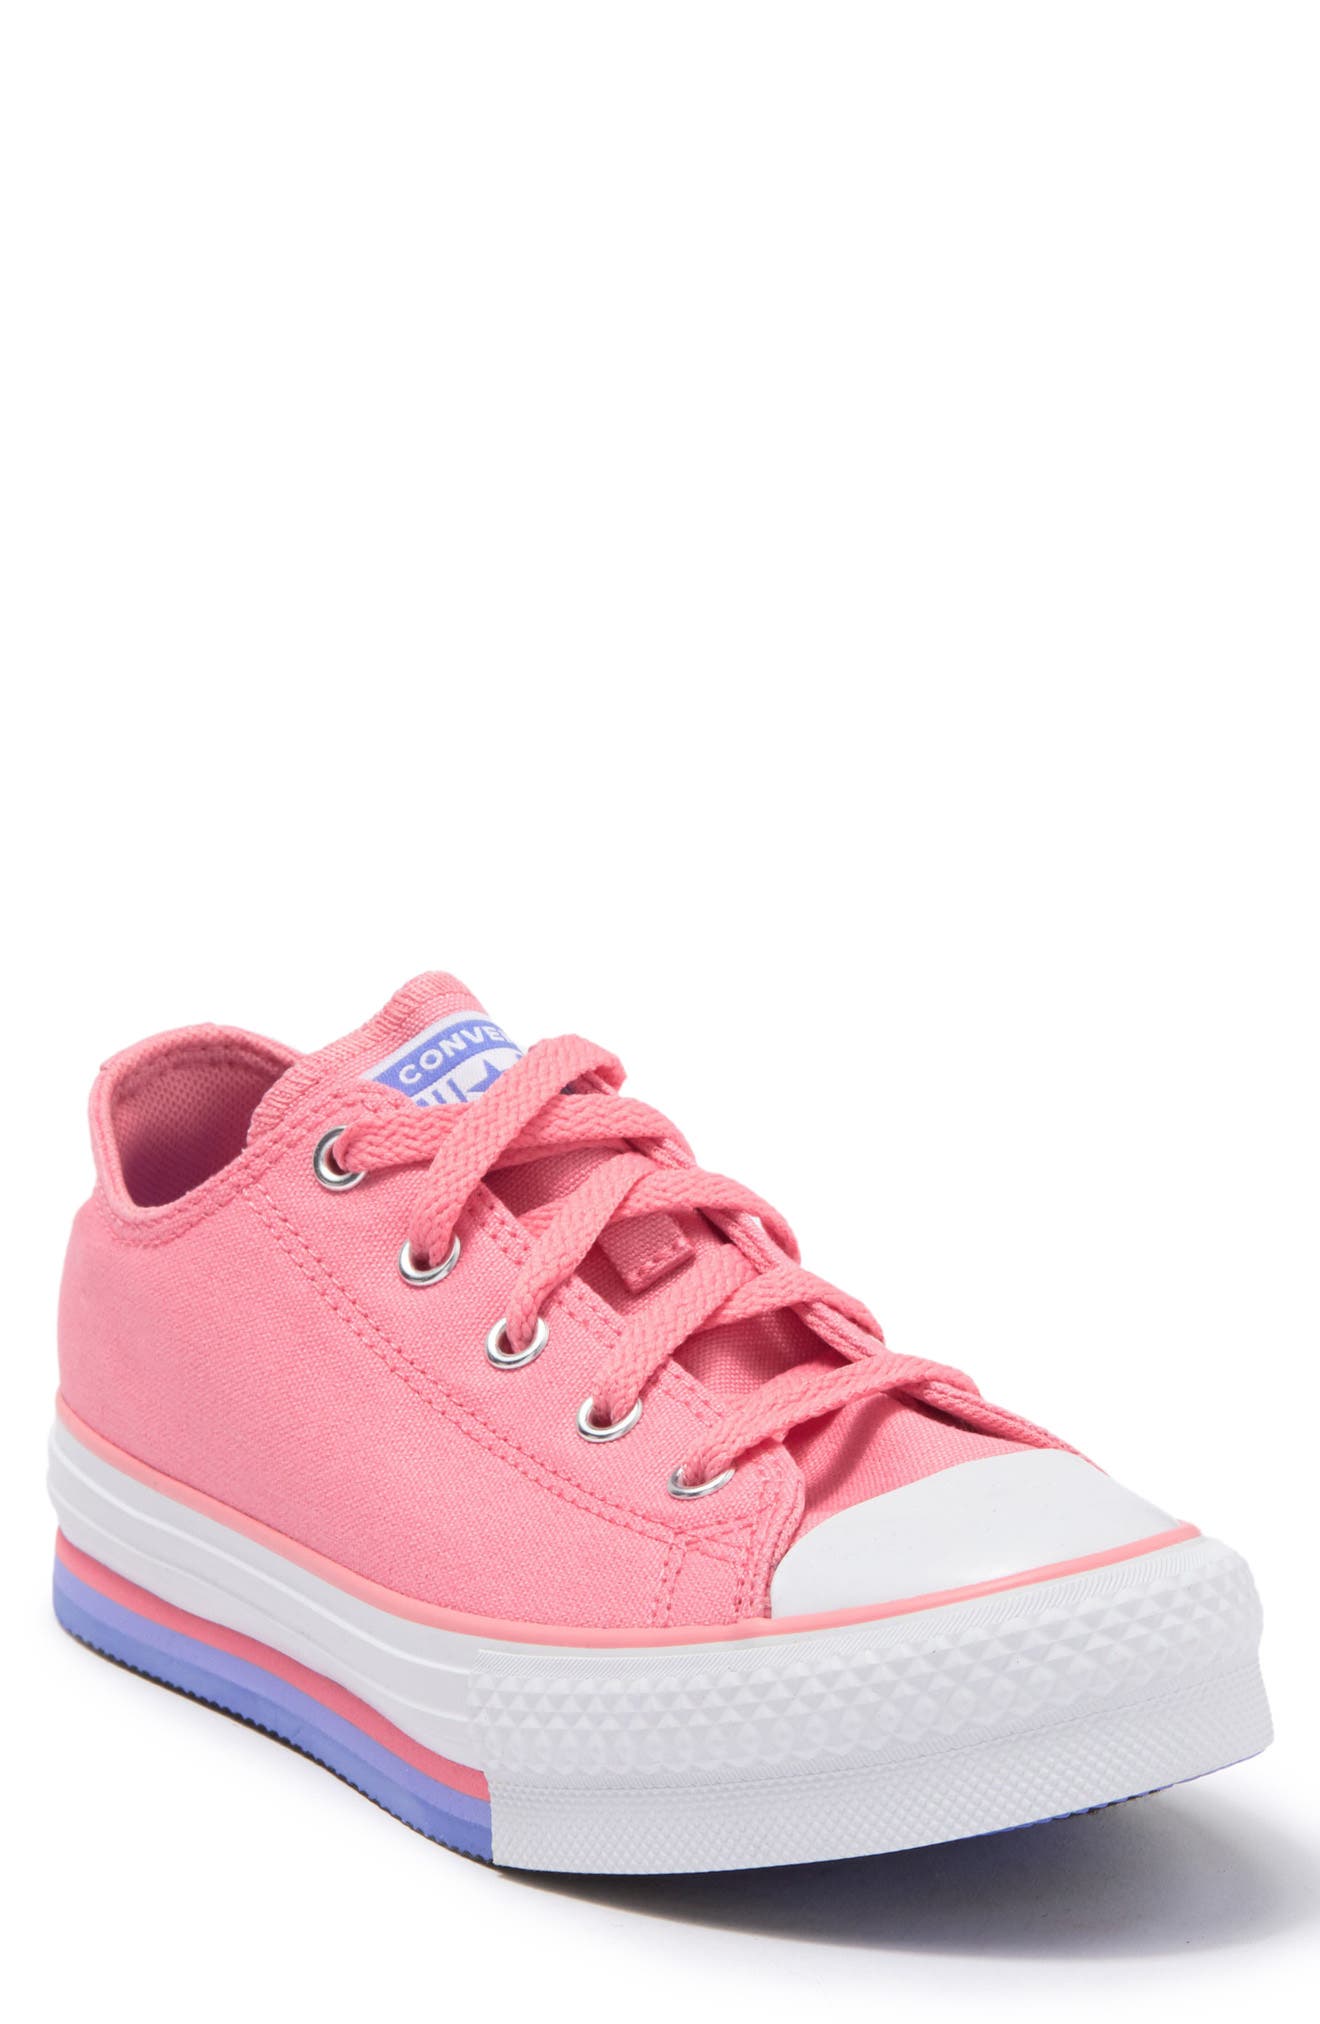 CONVERSE CHUCK TAYLOR ALL STAR LIFTED PINK LOW TOP SNEAKER,194432939271